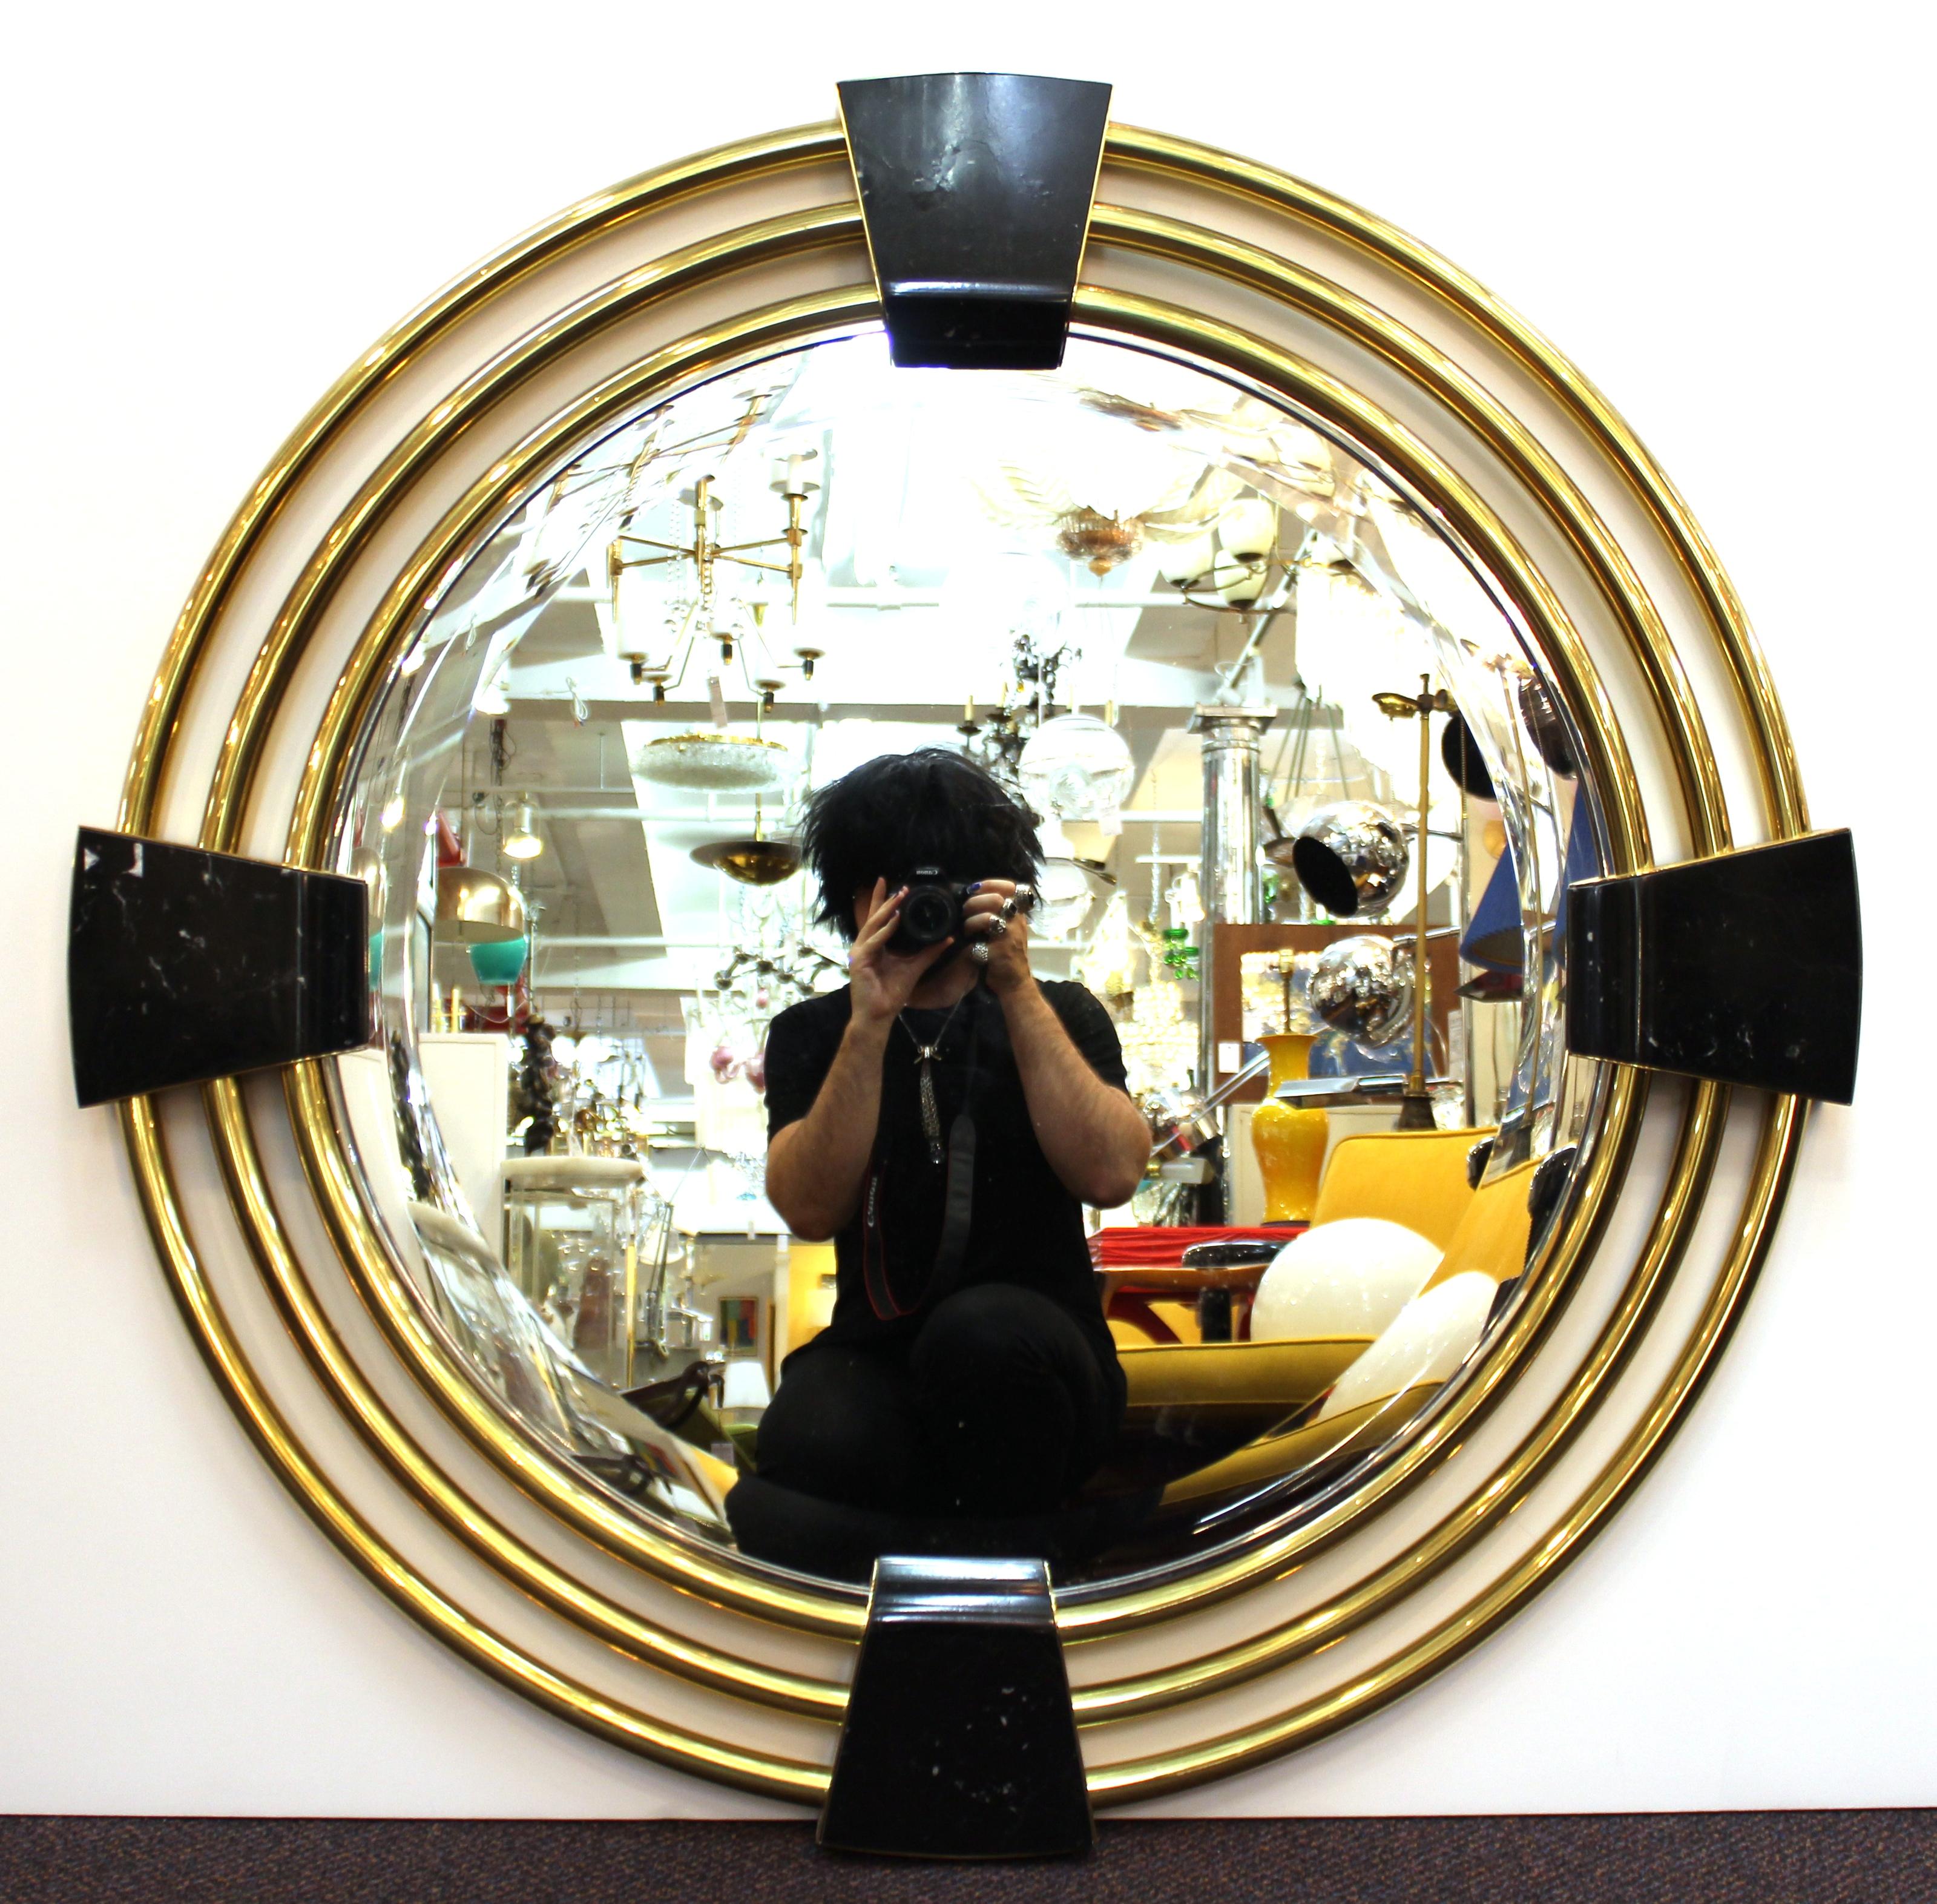 Modern round mirror, with concentric circular brass elements framing the mirror panel, held by four stone pieces. The piece is in great vintage condition with age-appropriate wear to the metal and stone surfaces.